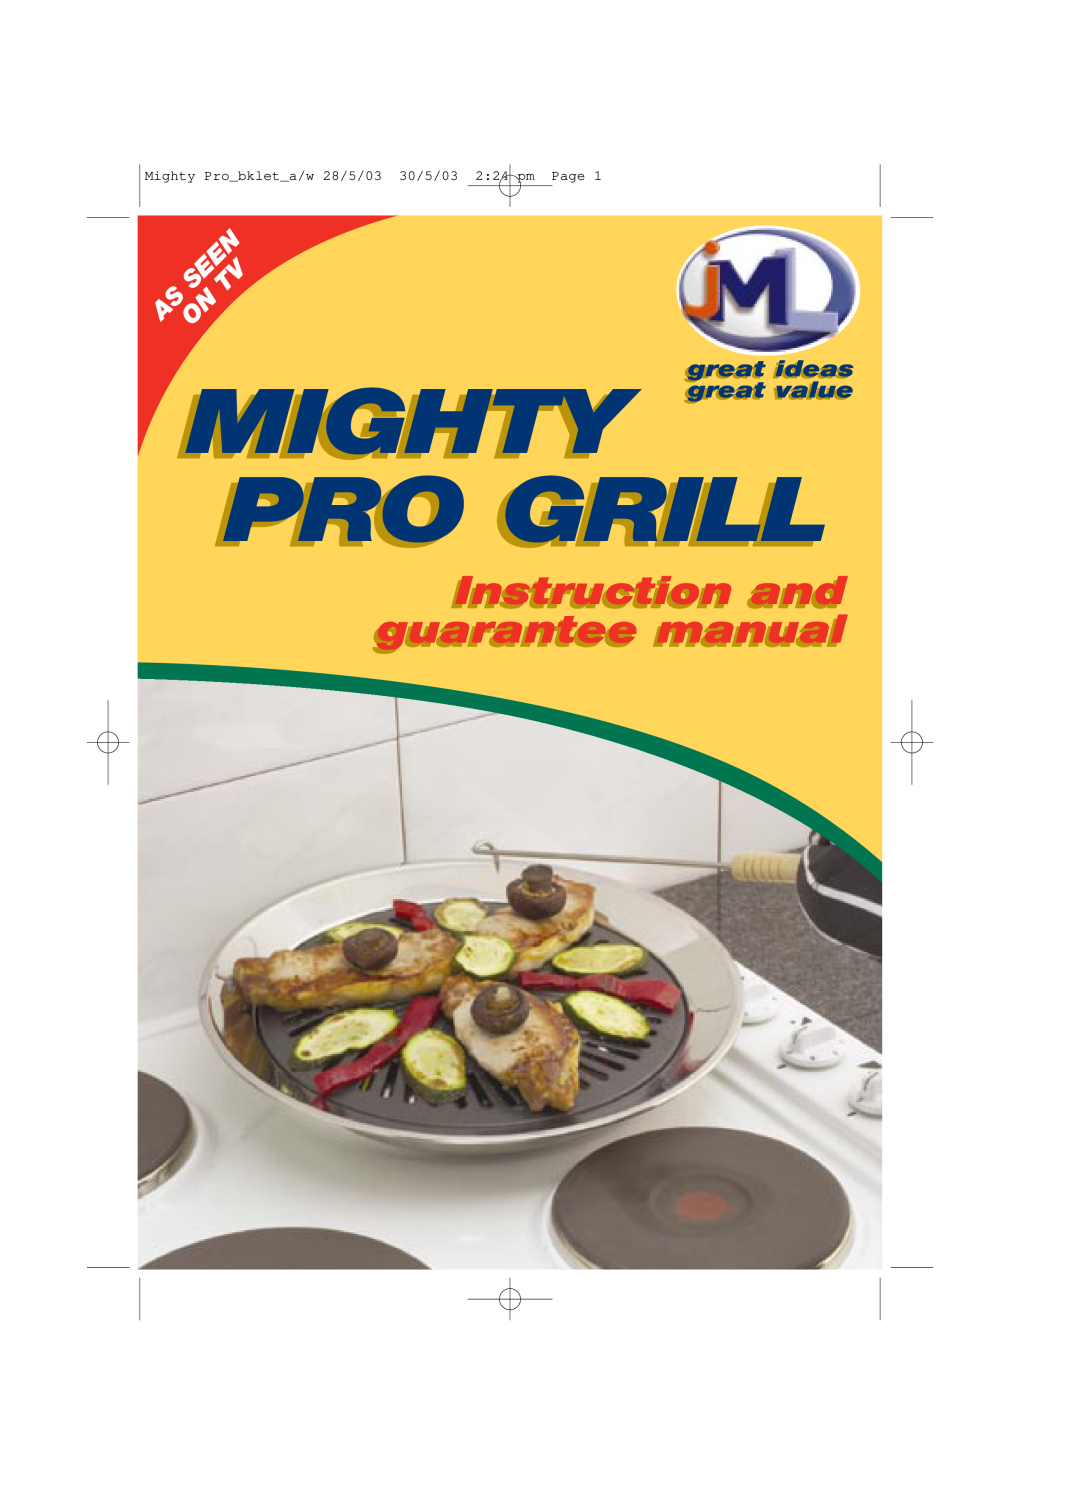 John Mills Mighty Pro Grill manual Mighty Pro bklet a/w 28/5/03 30/5/03 2 24 pm Page, IInstructioni and guarantee manuall 